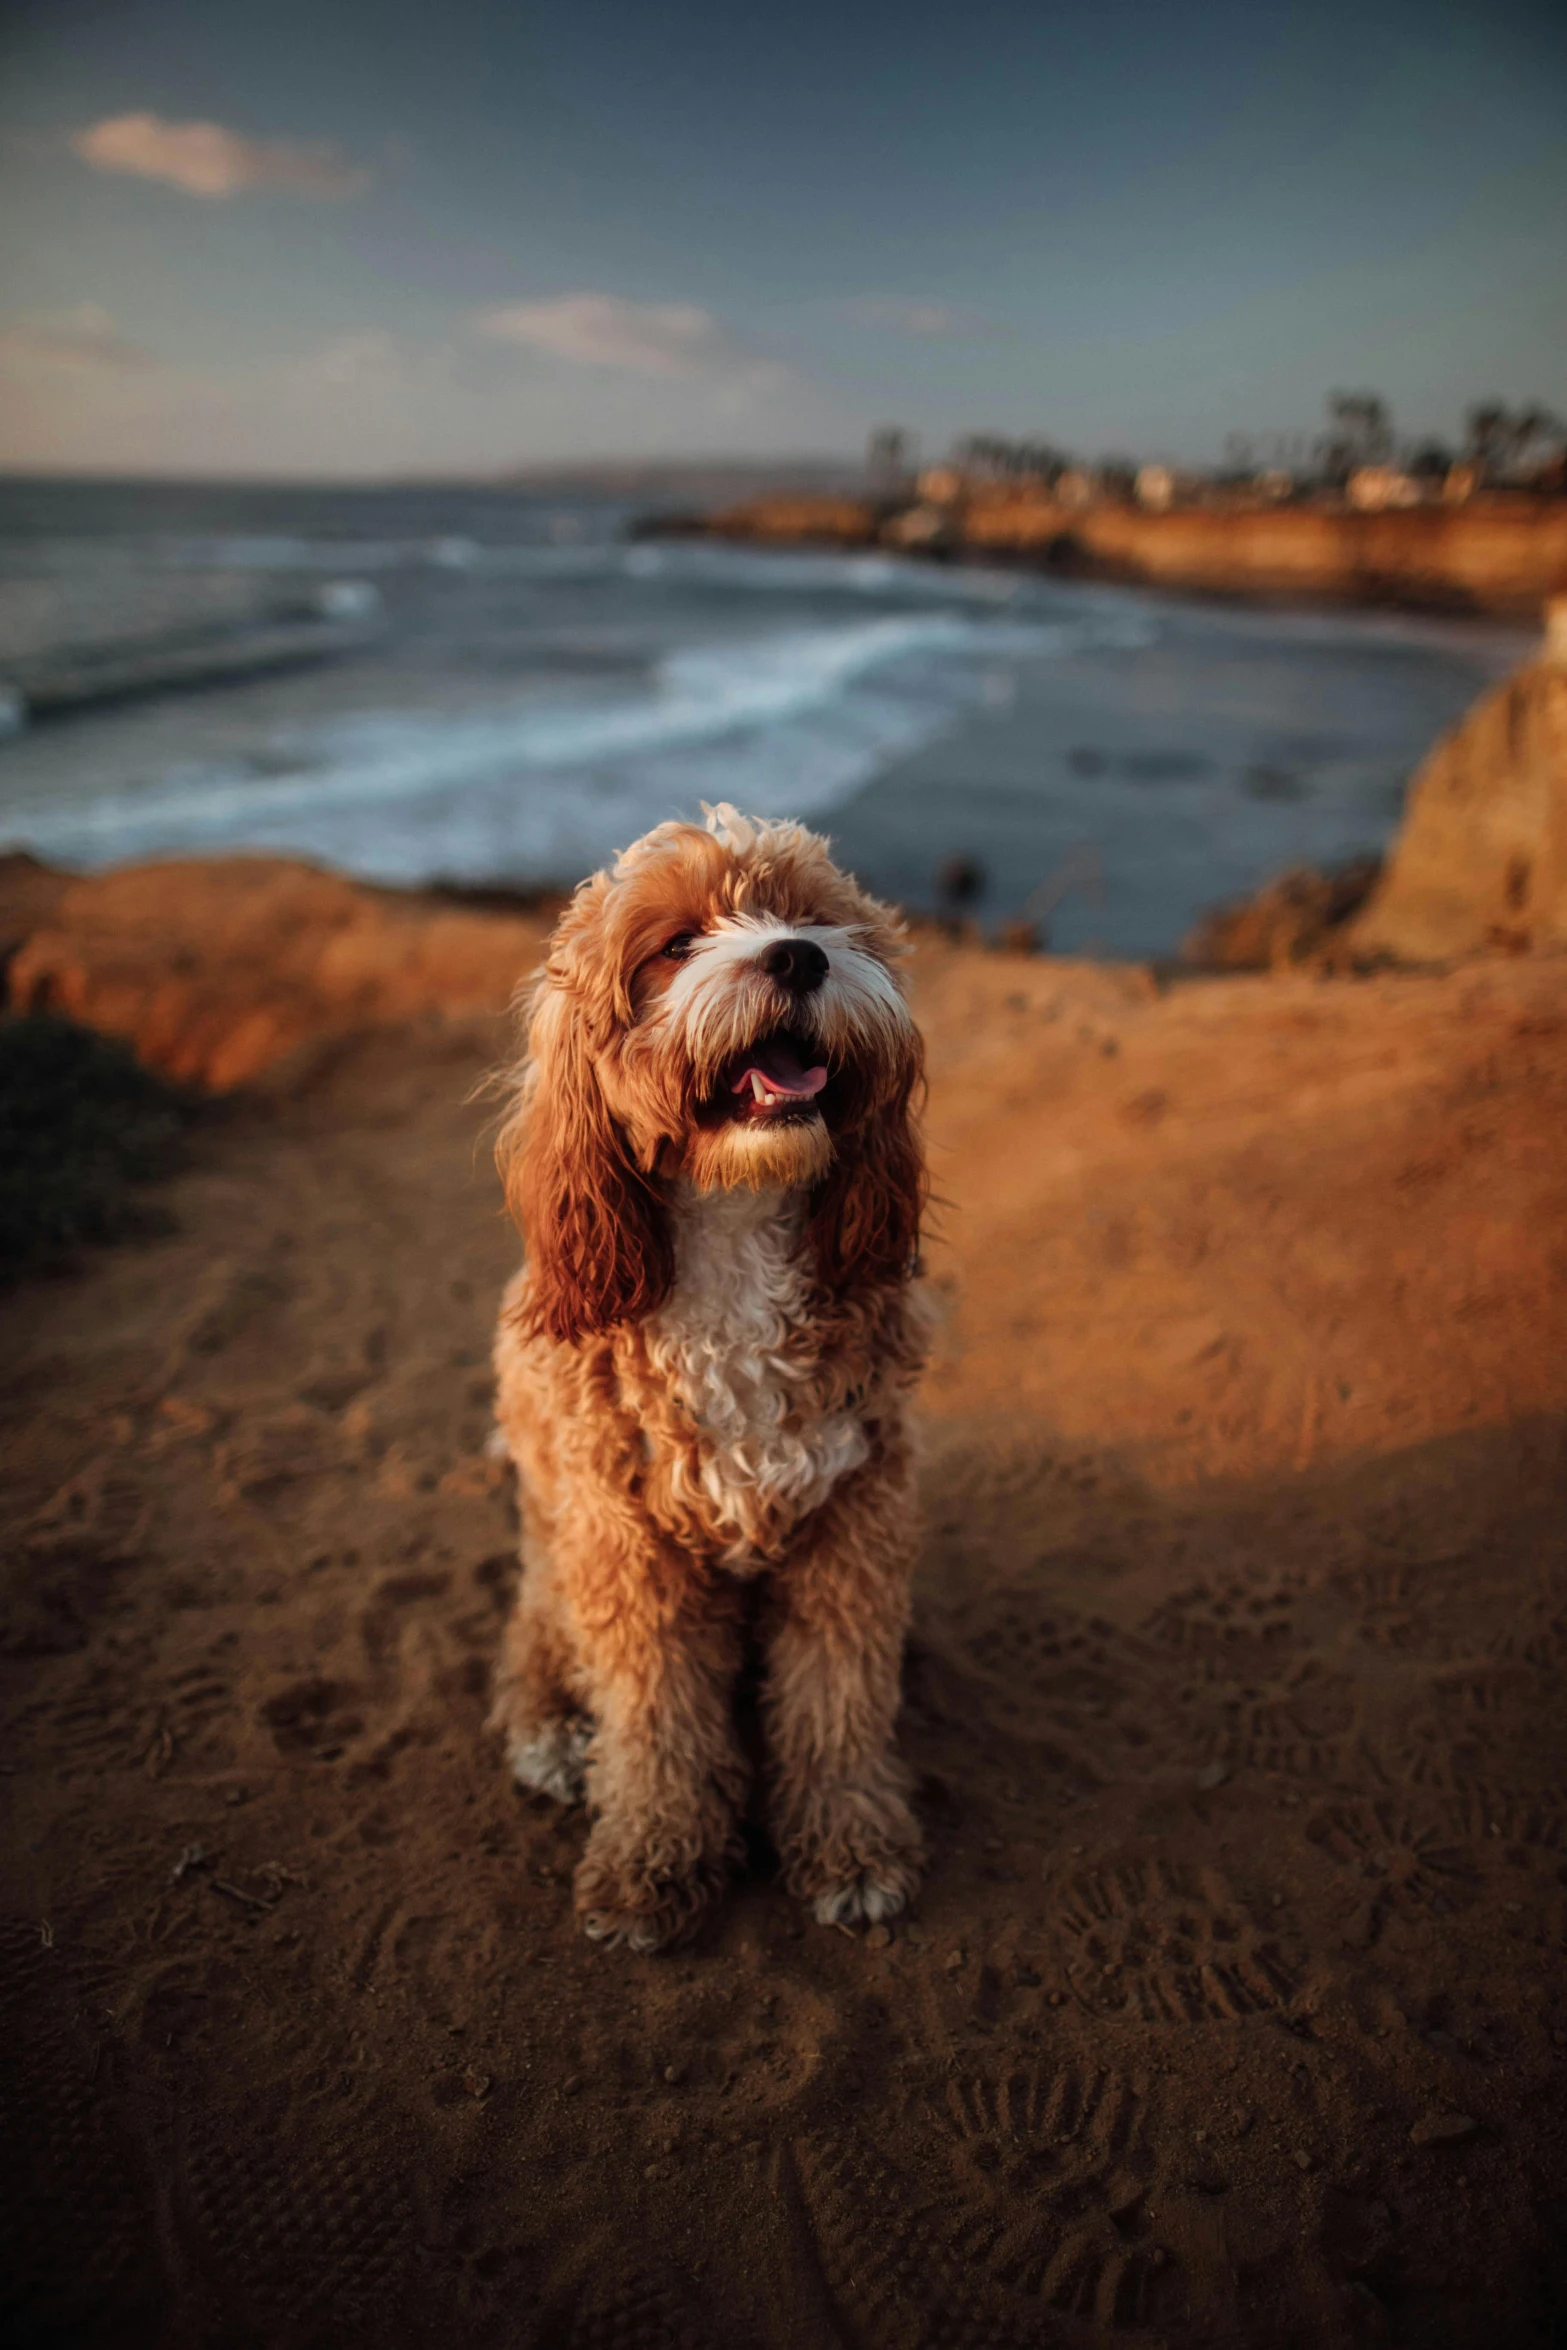 a brown and white dog sitting on top of a sandy beach, a portrait, unsplash, renaissance, oceanside, wookie, evening lighting, reddish